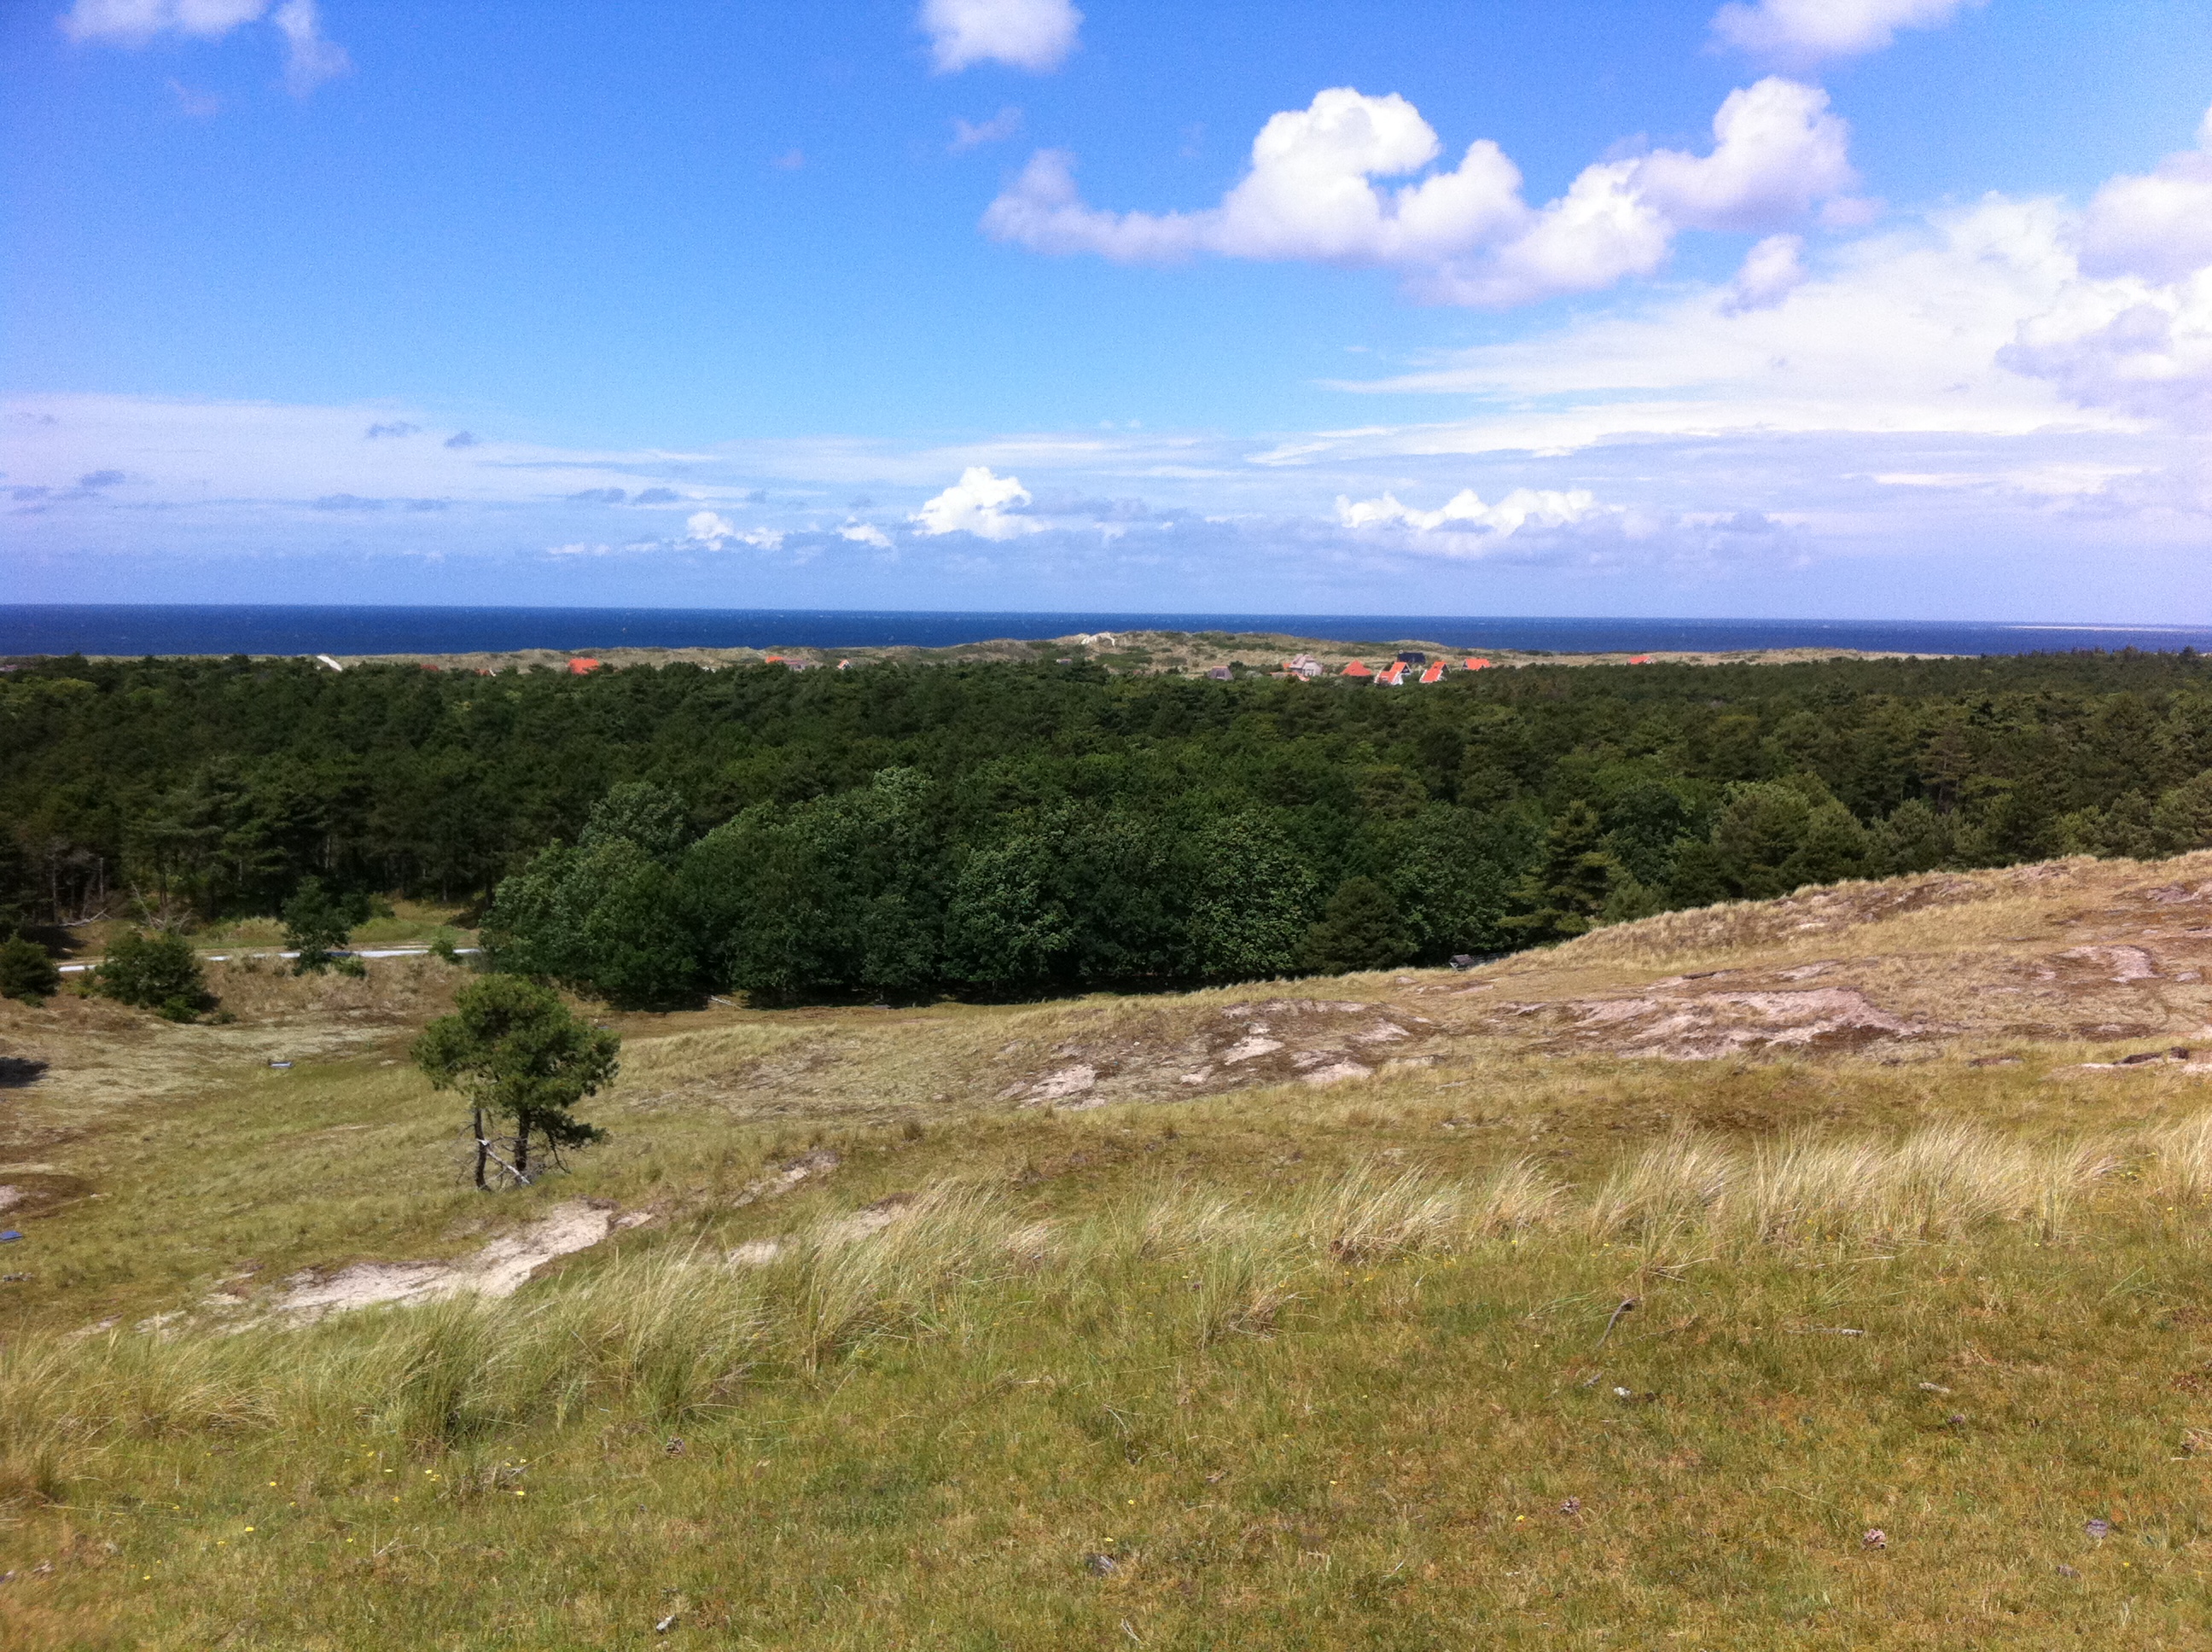 View to the north of Vlieland